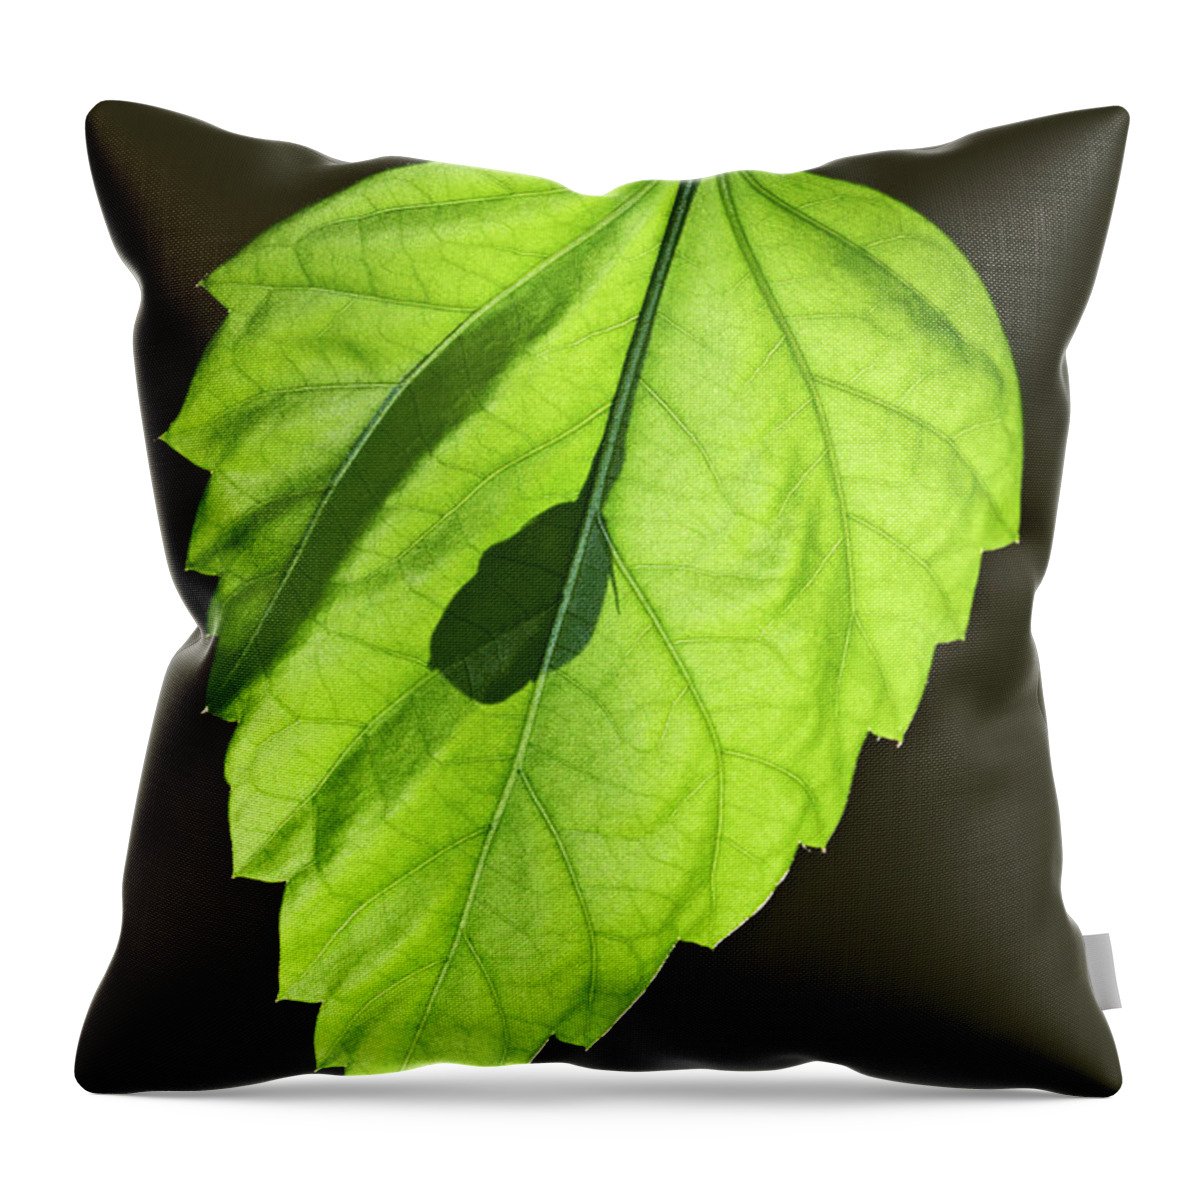 Green Hibiscus Throw Pillow featuring the photograph Green Hibiscus Leaf by Tony Cordoza